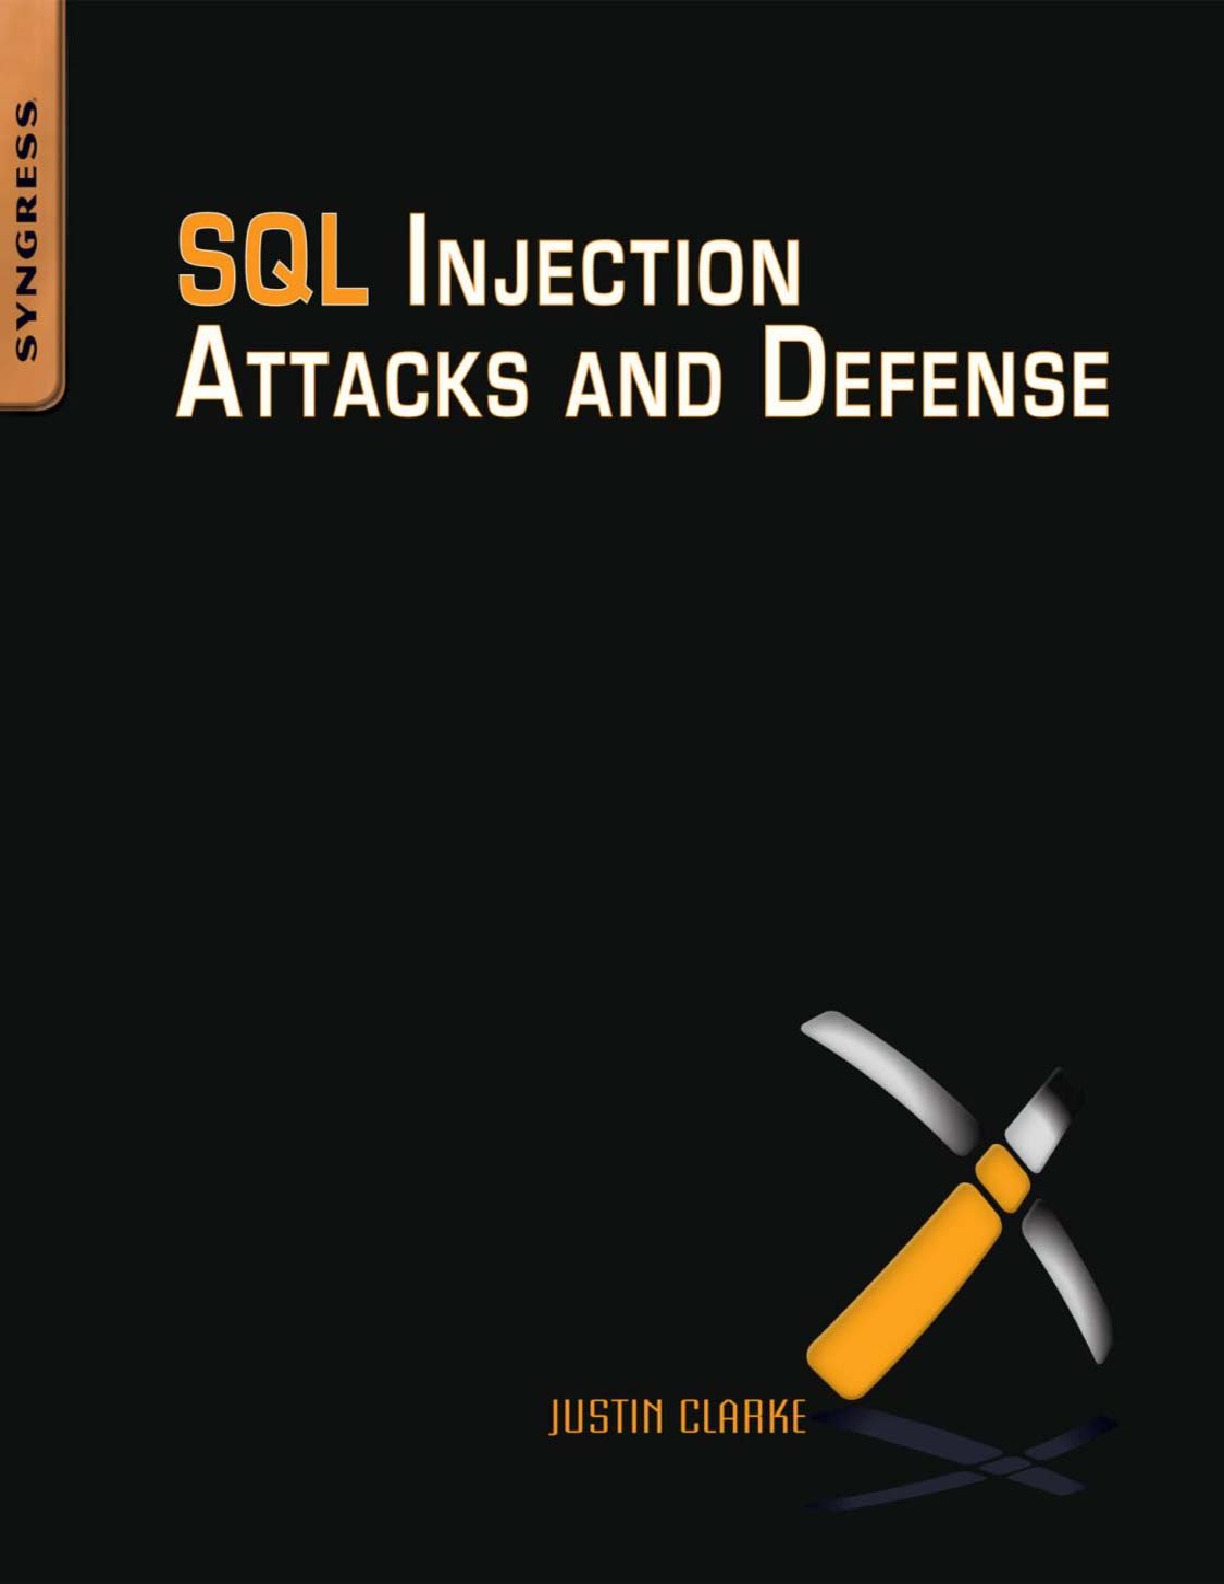 51. SQL Injection Attacks and Defense